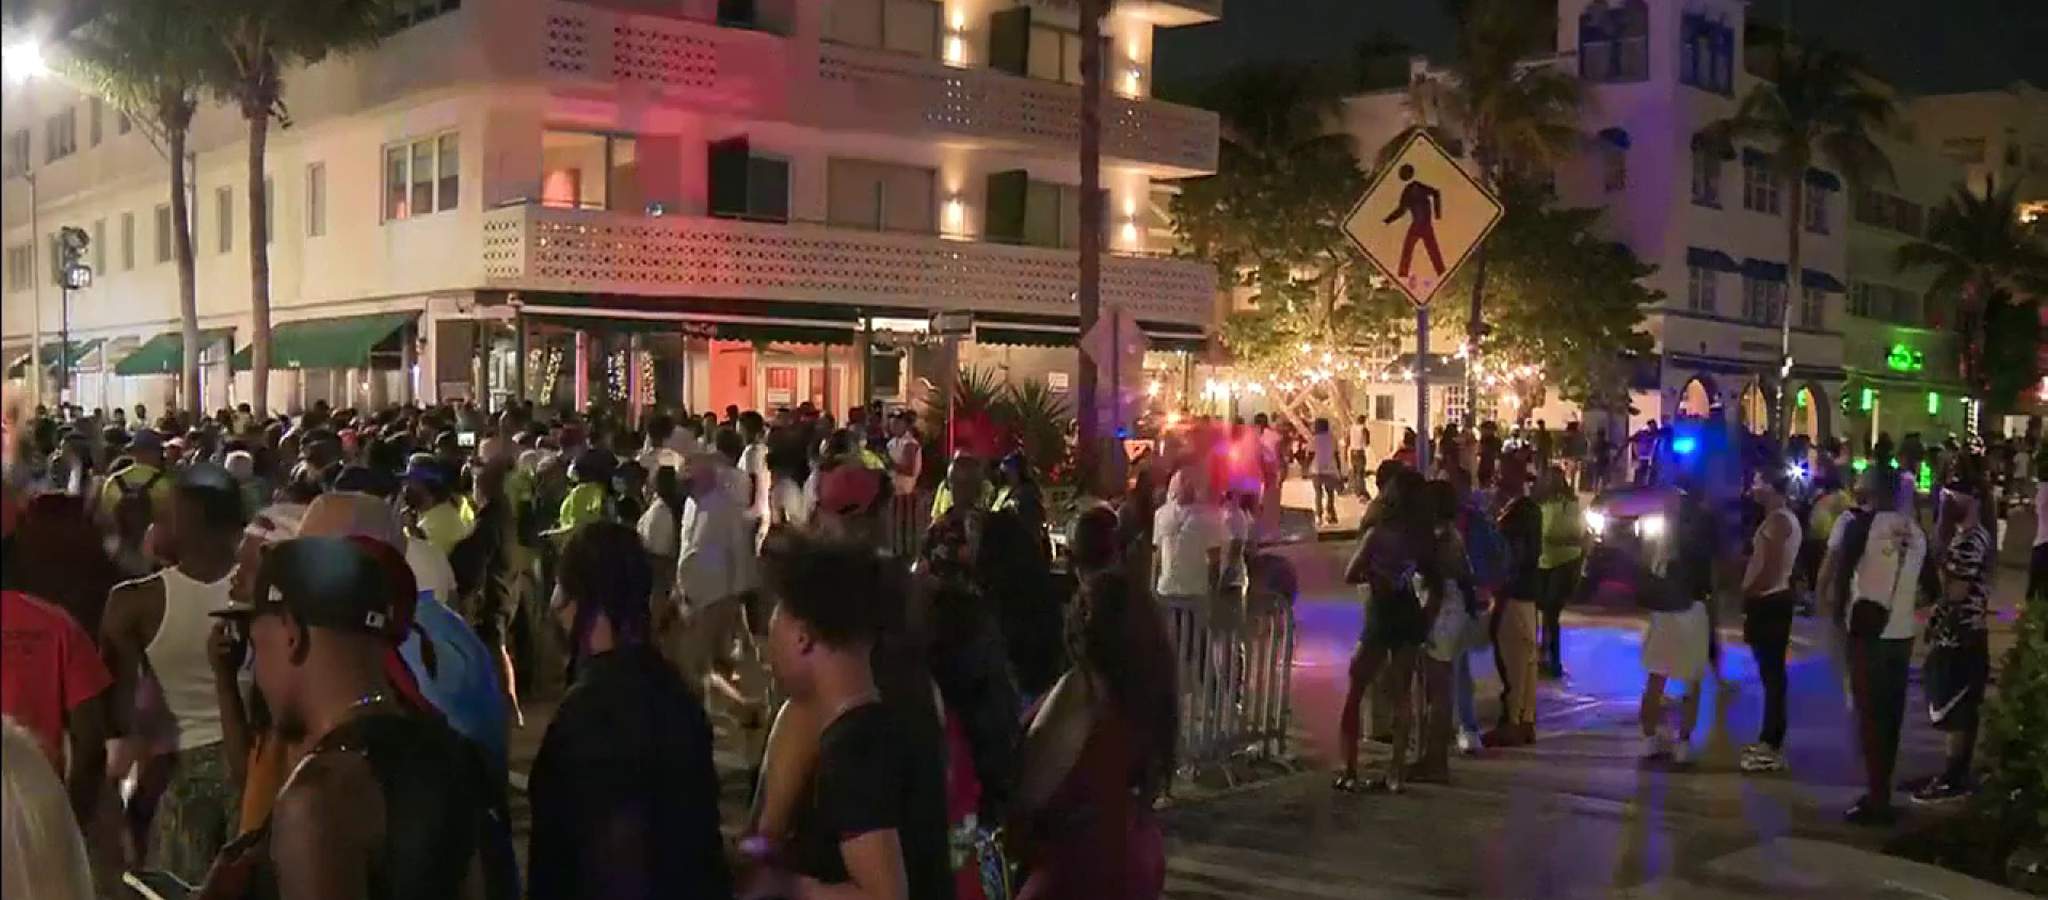 South Beach party just moves in different direction despite 8 p.m. imposed curfew